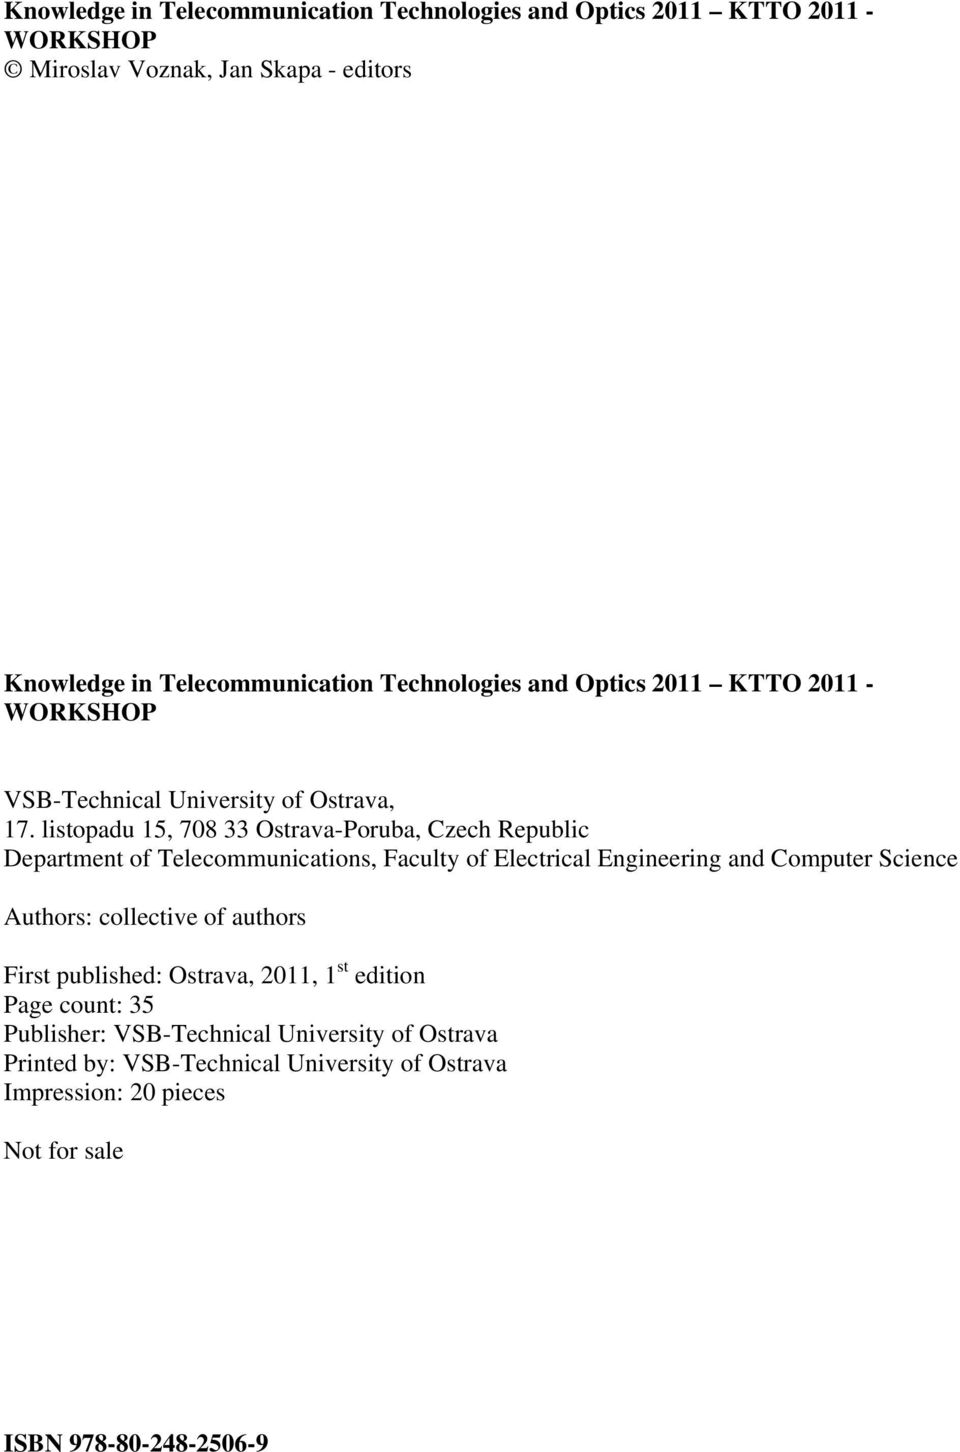 listopadu 15, 708 33 Ostrava-Poruba, Czech Republic Department of Telecommunications, Faculty of Electrical Engineering and Computer Science Authors: